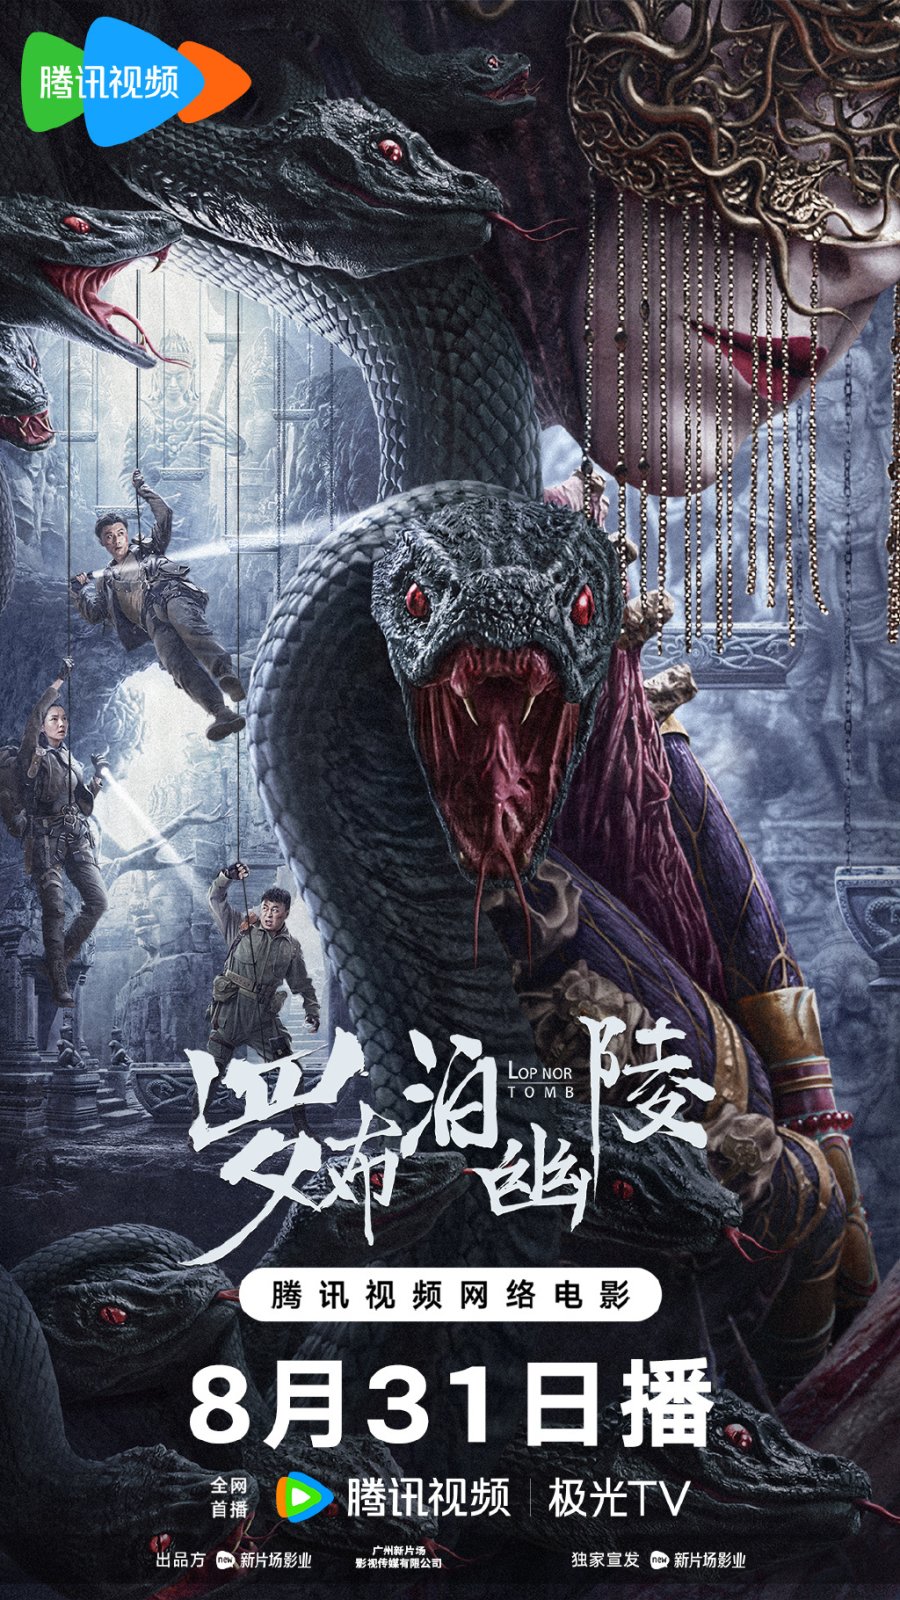 Lop nor Tomb (2023) Full Movie [In Chinese] With Hindi Subtitles  WEBRip 720p Online Stream – 1XBET